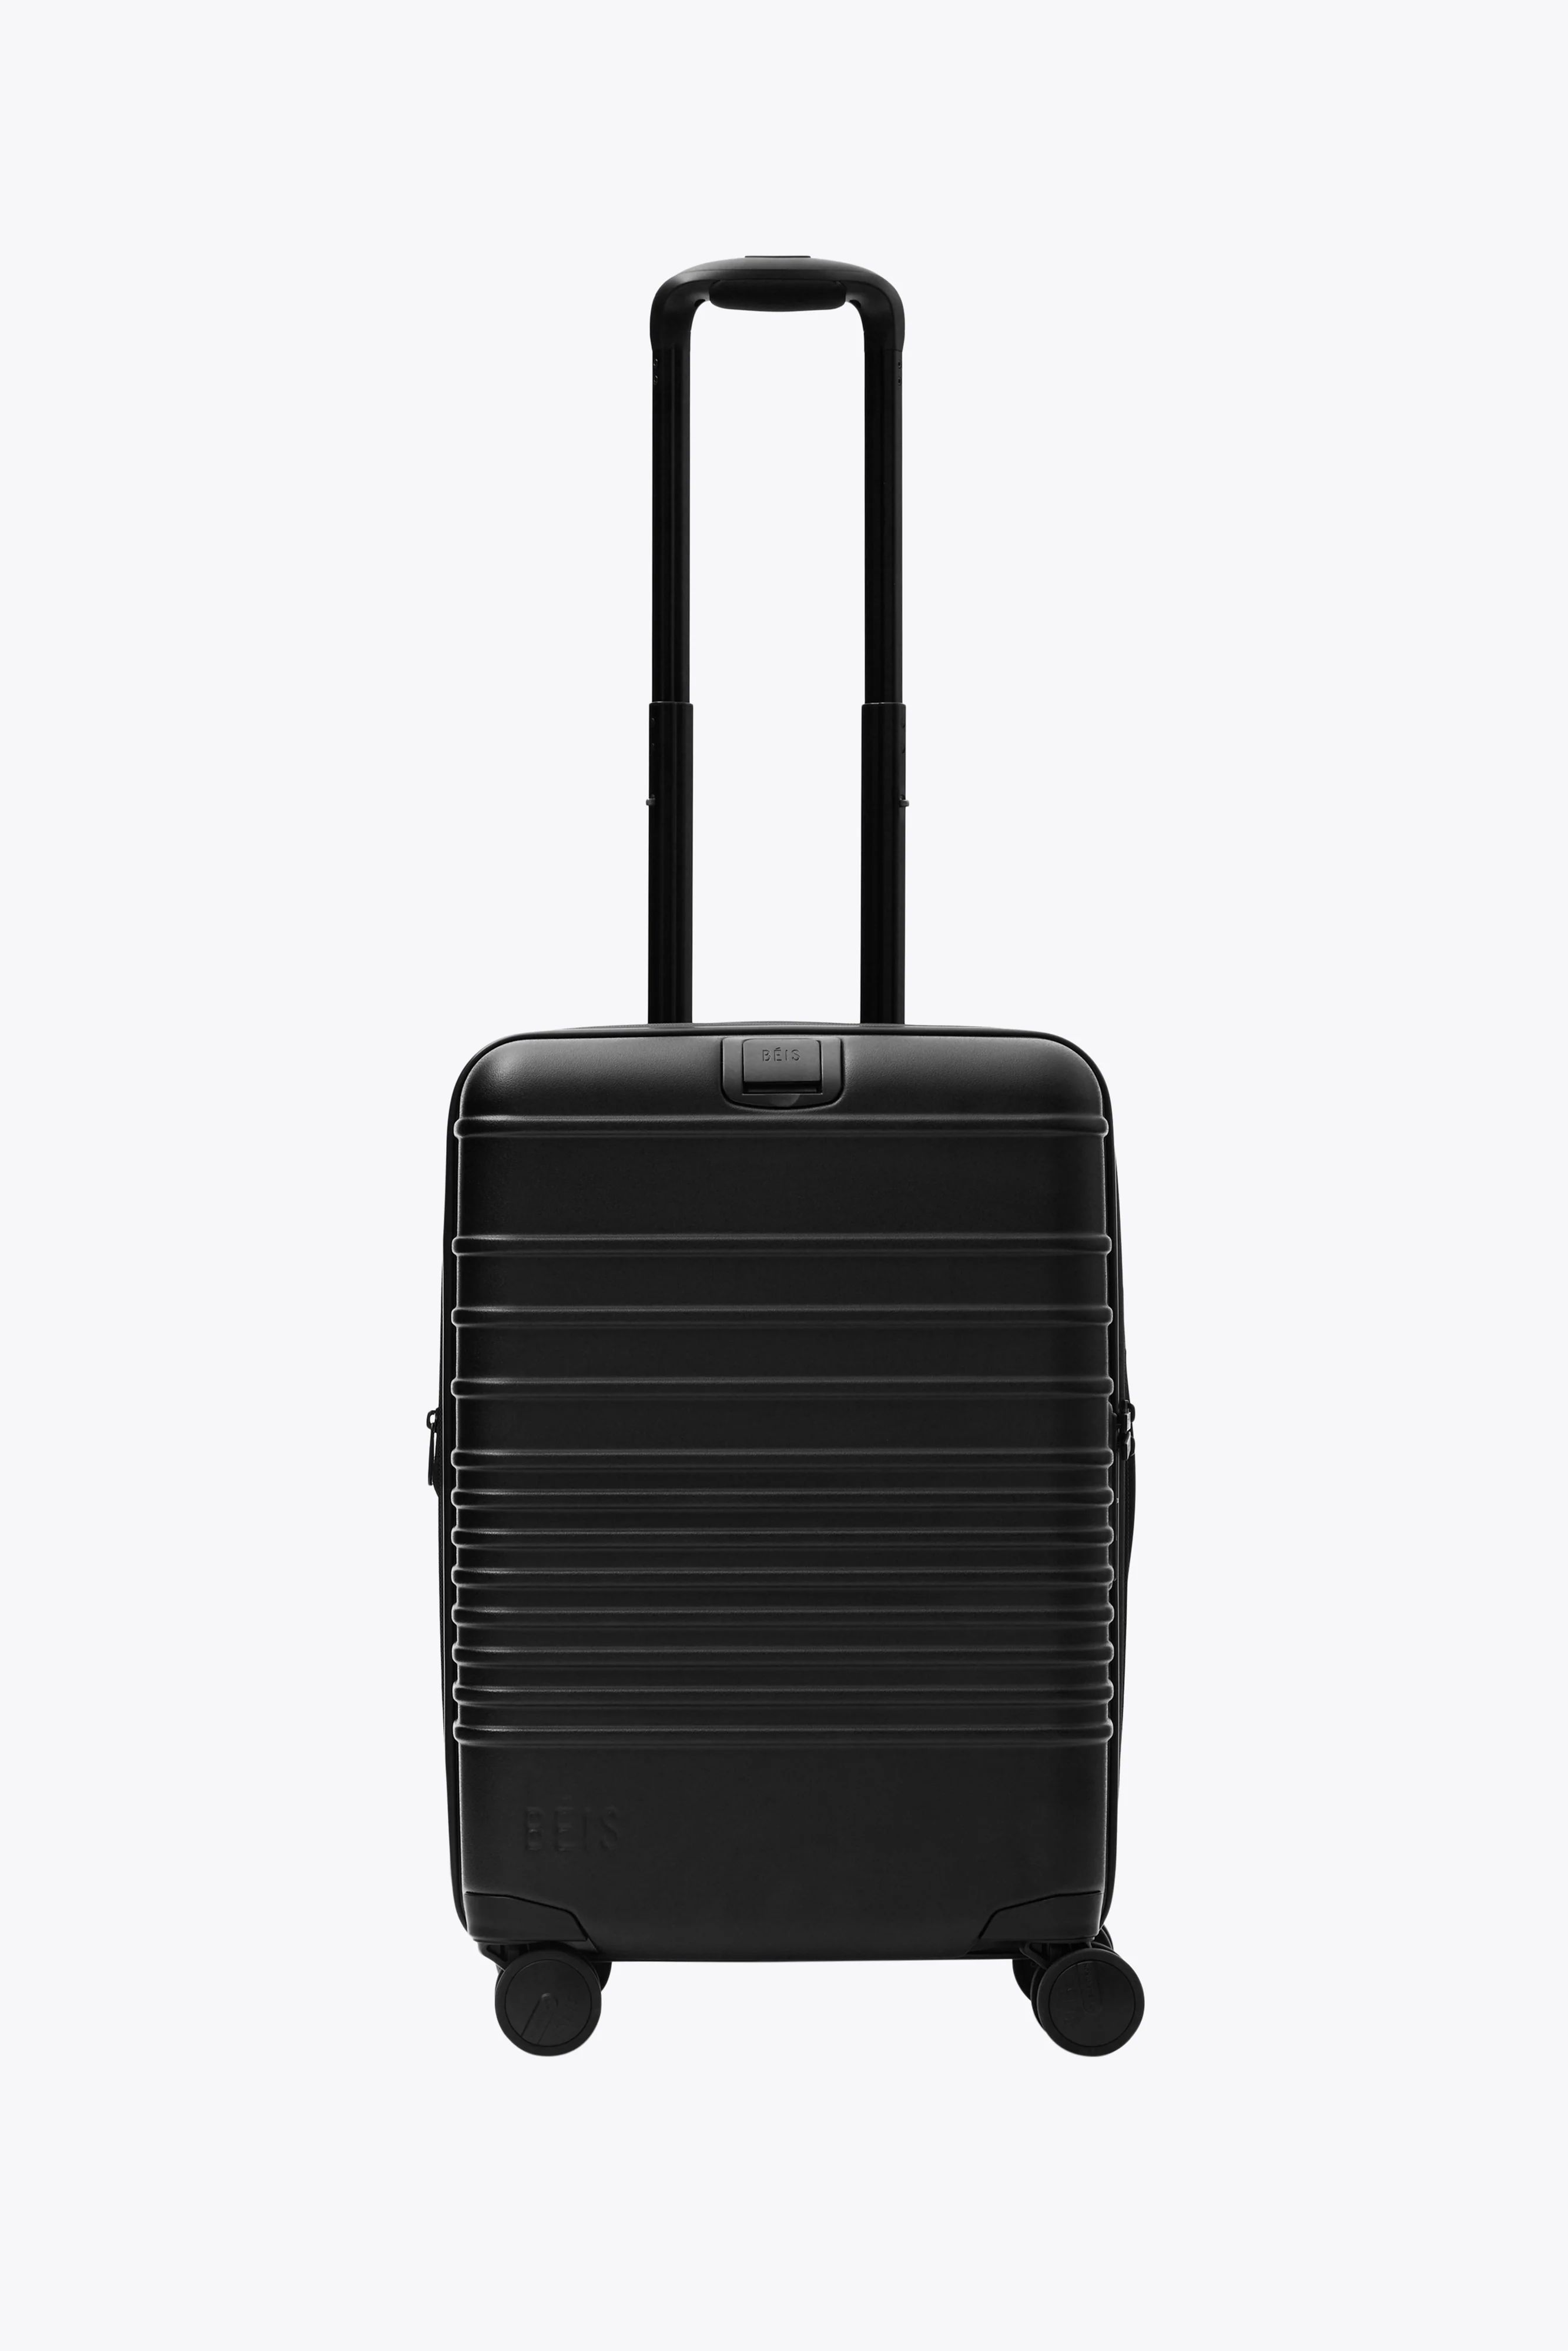 BÉIS 'The Carry-On Roller' In All Black - All Black Carry-On Rolling Luggage | BÉIS Travel